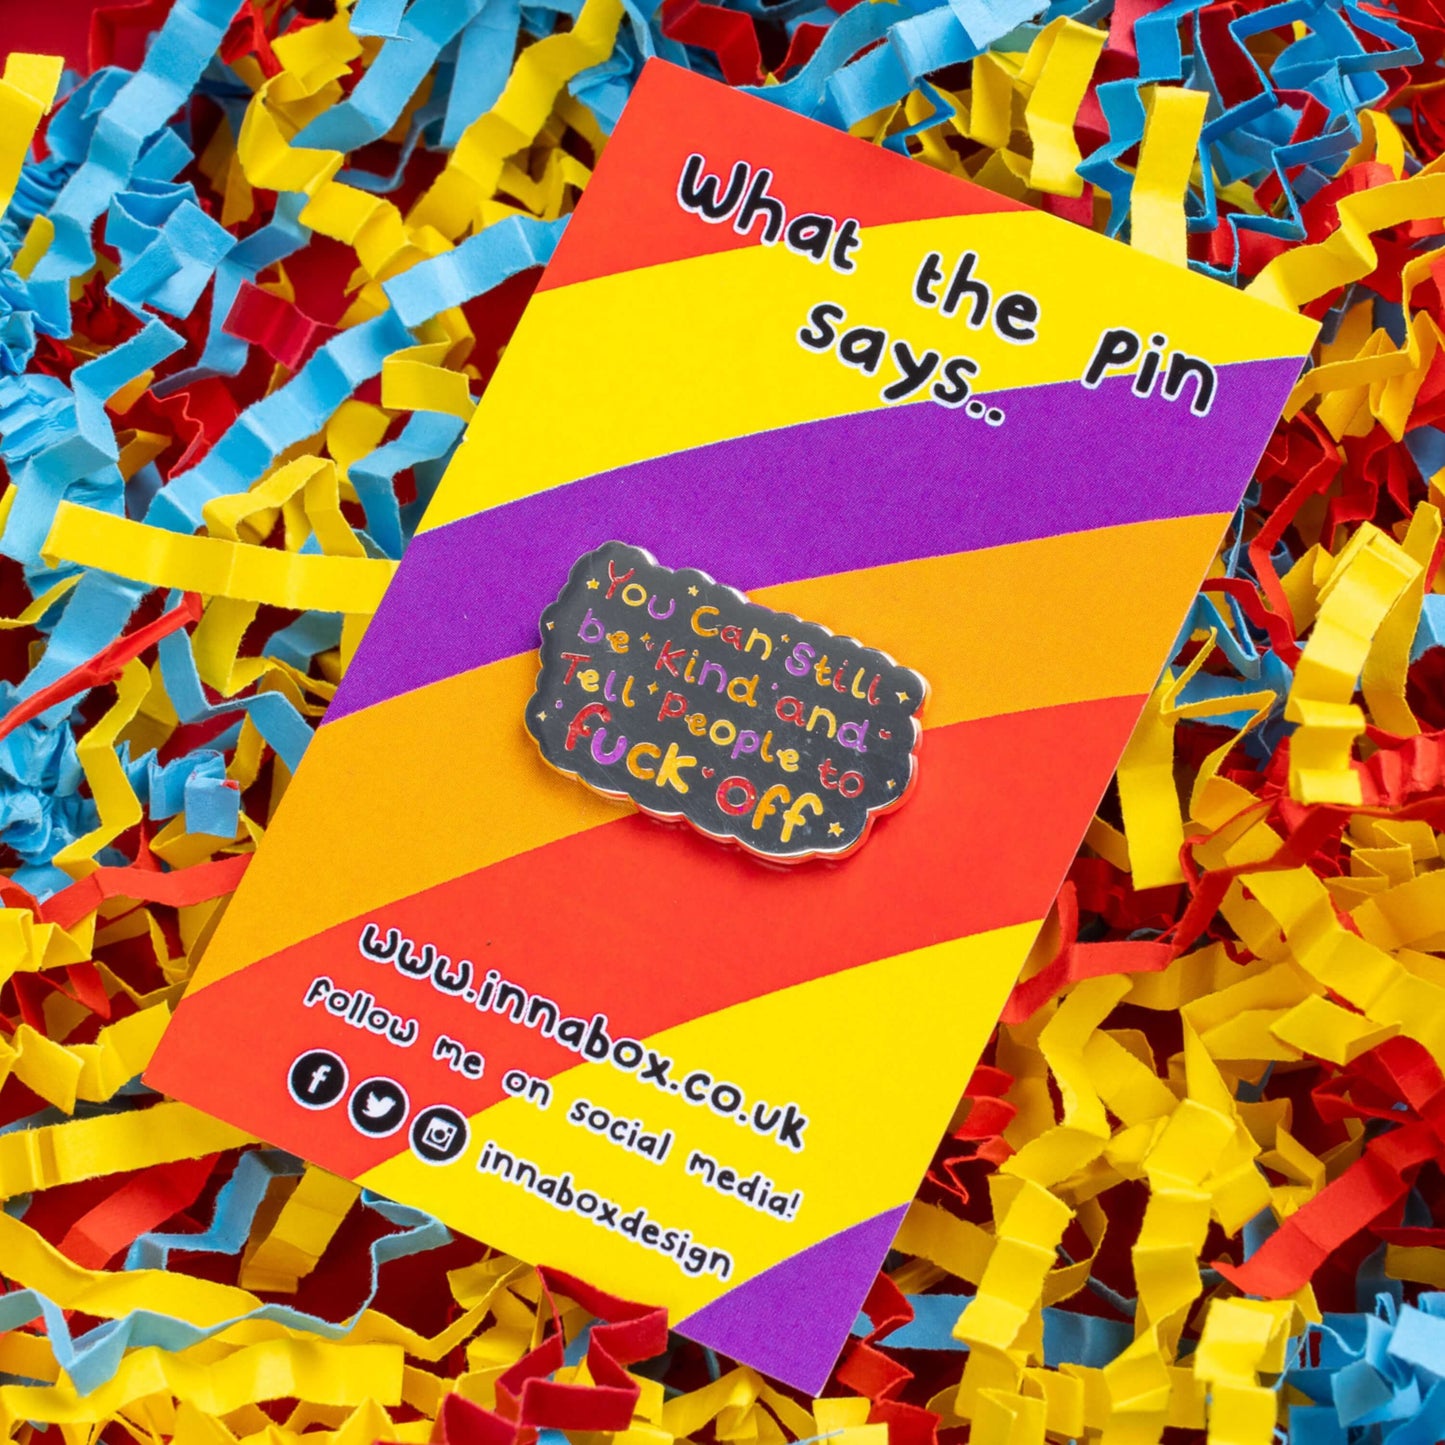 The You Can Still be Kind and Tell People to F**k Off Enamel Pin on red, yellow, purple and orange stripe backing card with top text reading 'what the pin says..' laid on a red, blue and yellow card confetti background. The shiny silver enamel pin has rainbow writing reading 'you can still be kind and tell people to fuck off' with multicoloured sparkles, dots and stars.